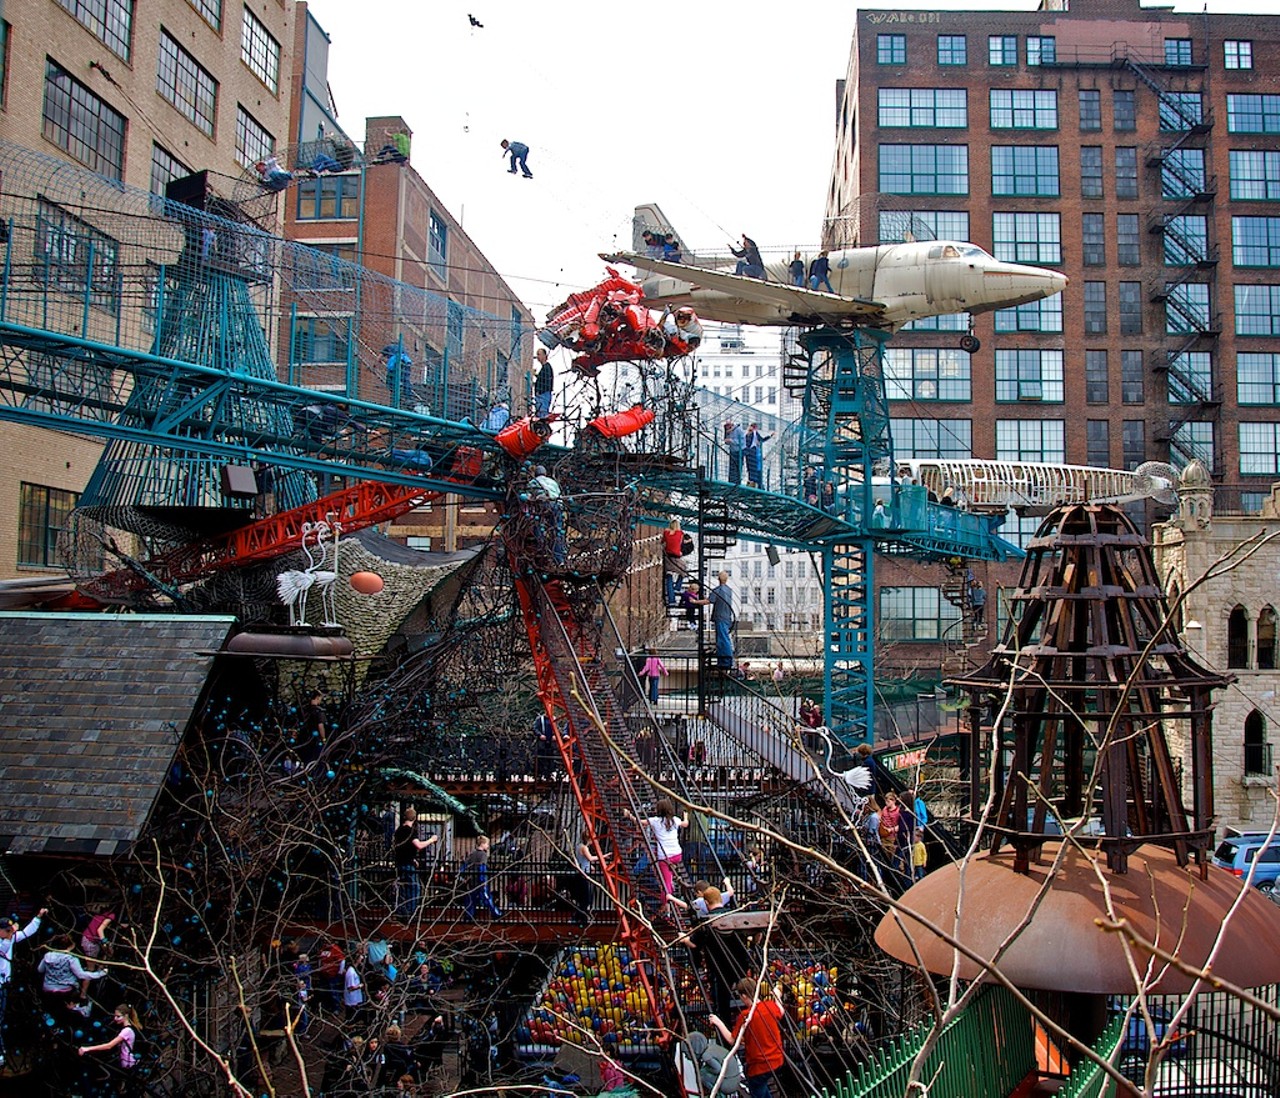 Go back to City Museum
If you haven't been there in a few years, it's got whole new sections that didn't exist earlier &#151; new caves in the floor, catwalks into secret rooms, and an abundance of cool post-post-modern sculptures that they've been quietly acquiring. - Evan Sult
Check it out here.
Photo courtesy of sawdust_media / Flickr